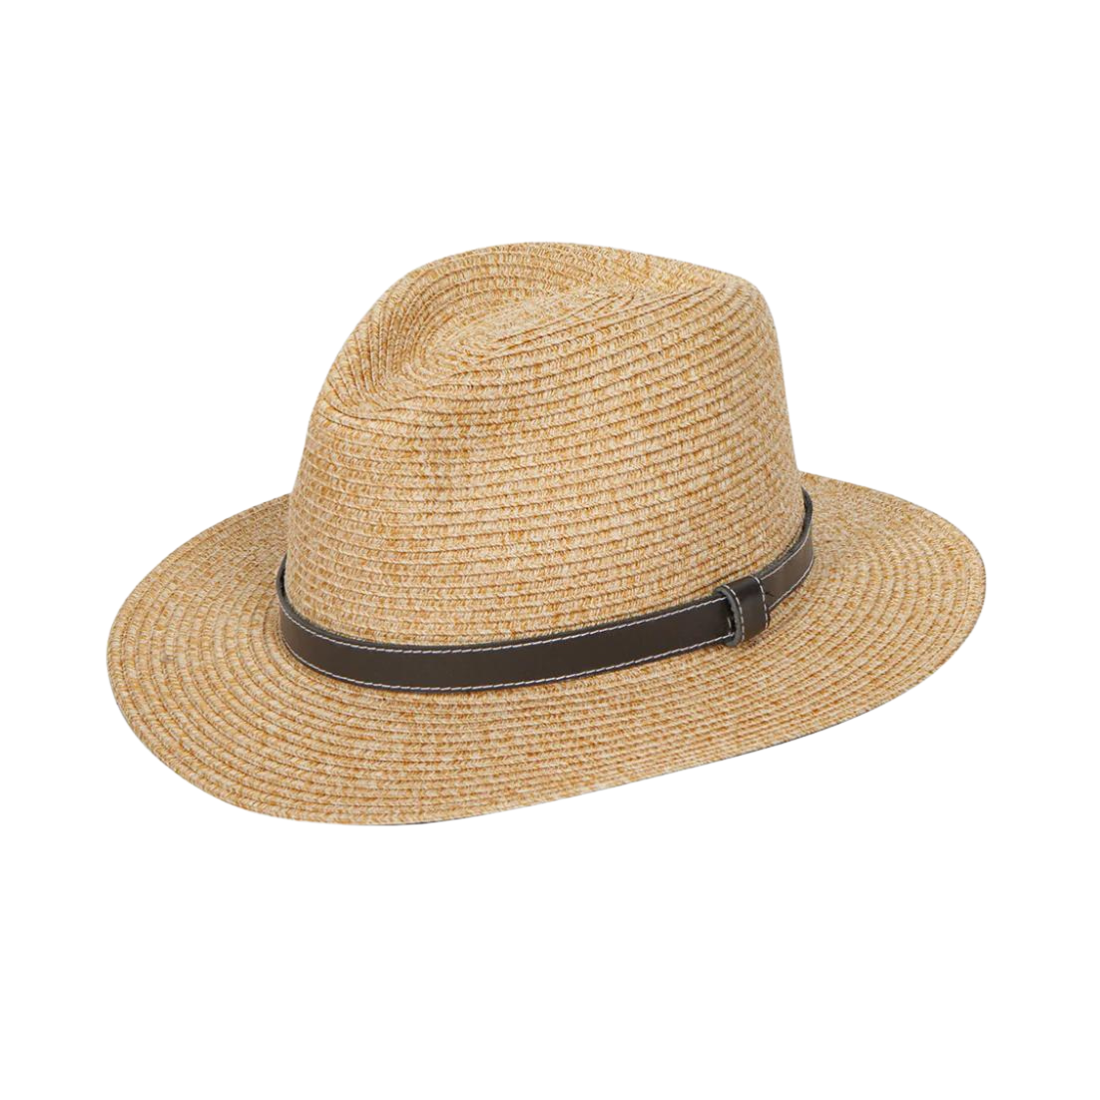 Stoney Creek Fedora L/XL Natural Mens Hats by ooGee | The Bloke Shop